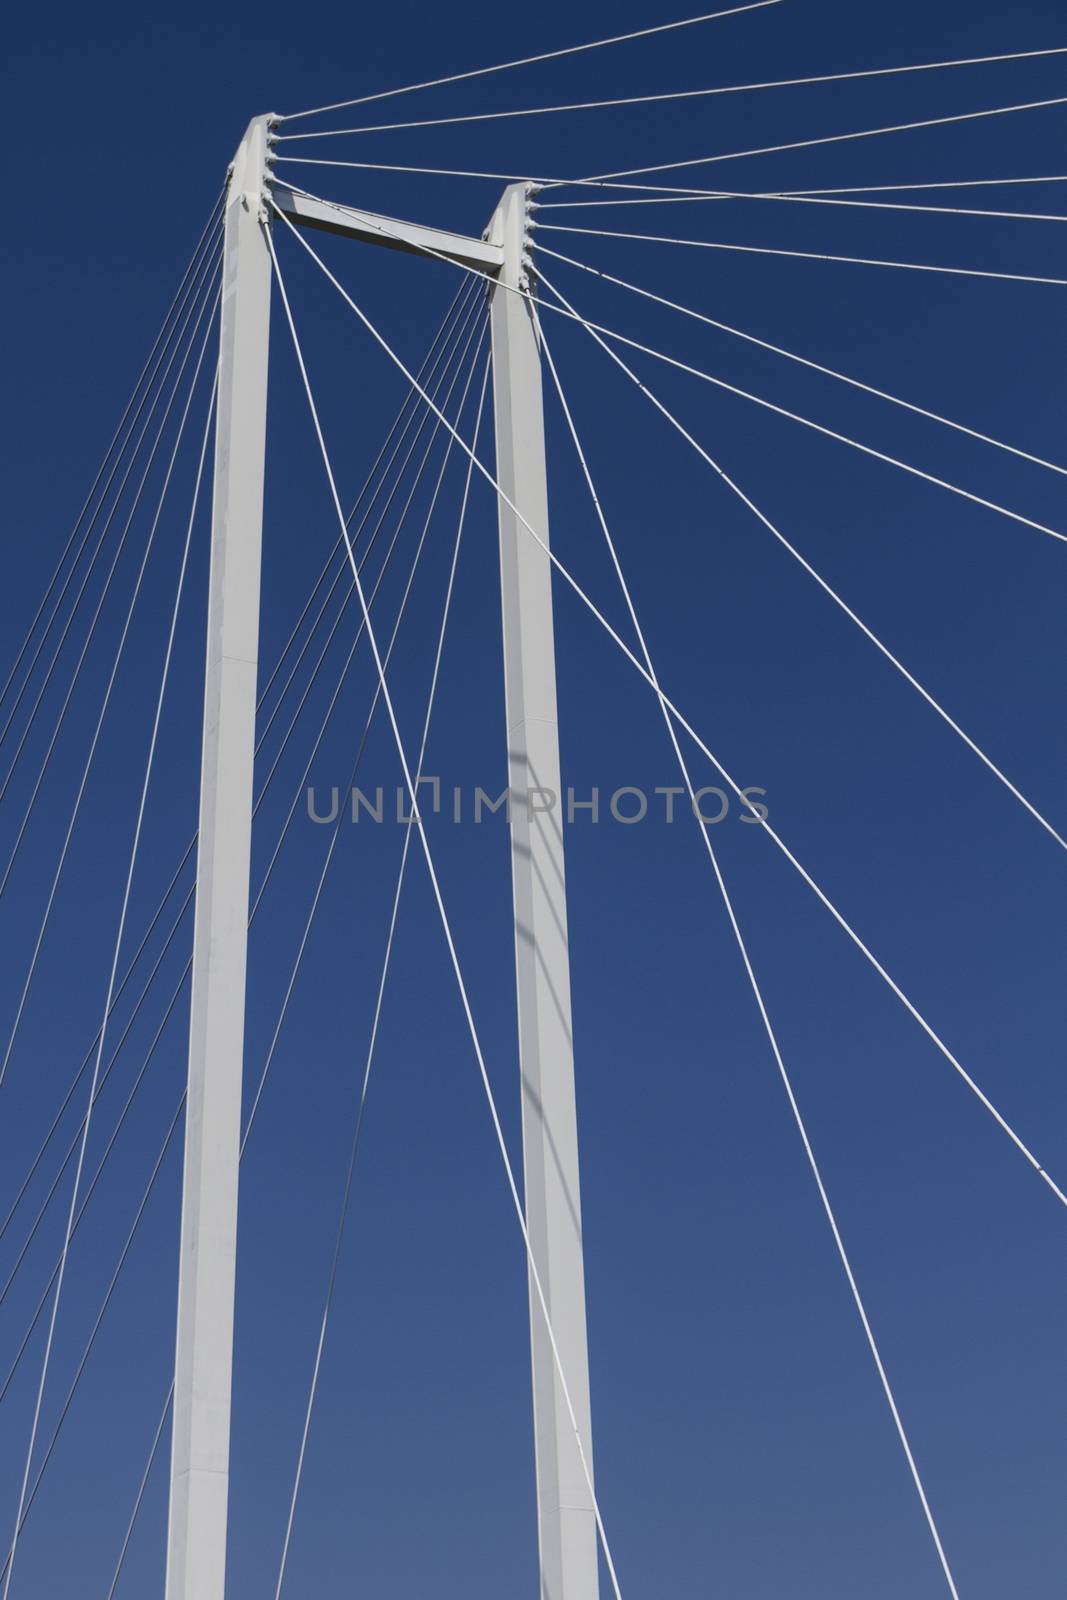 upper part of a suspension bridge with ropes and support before blue sky